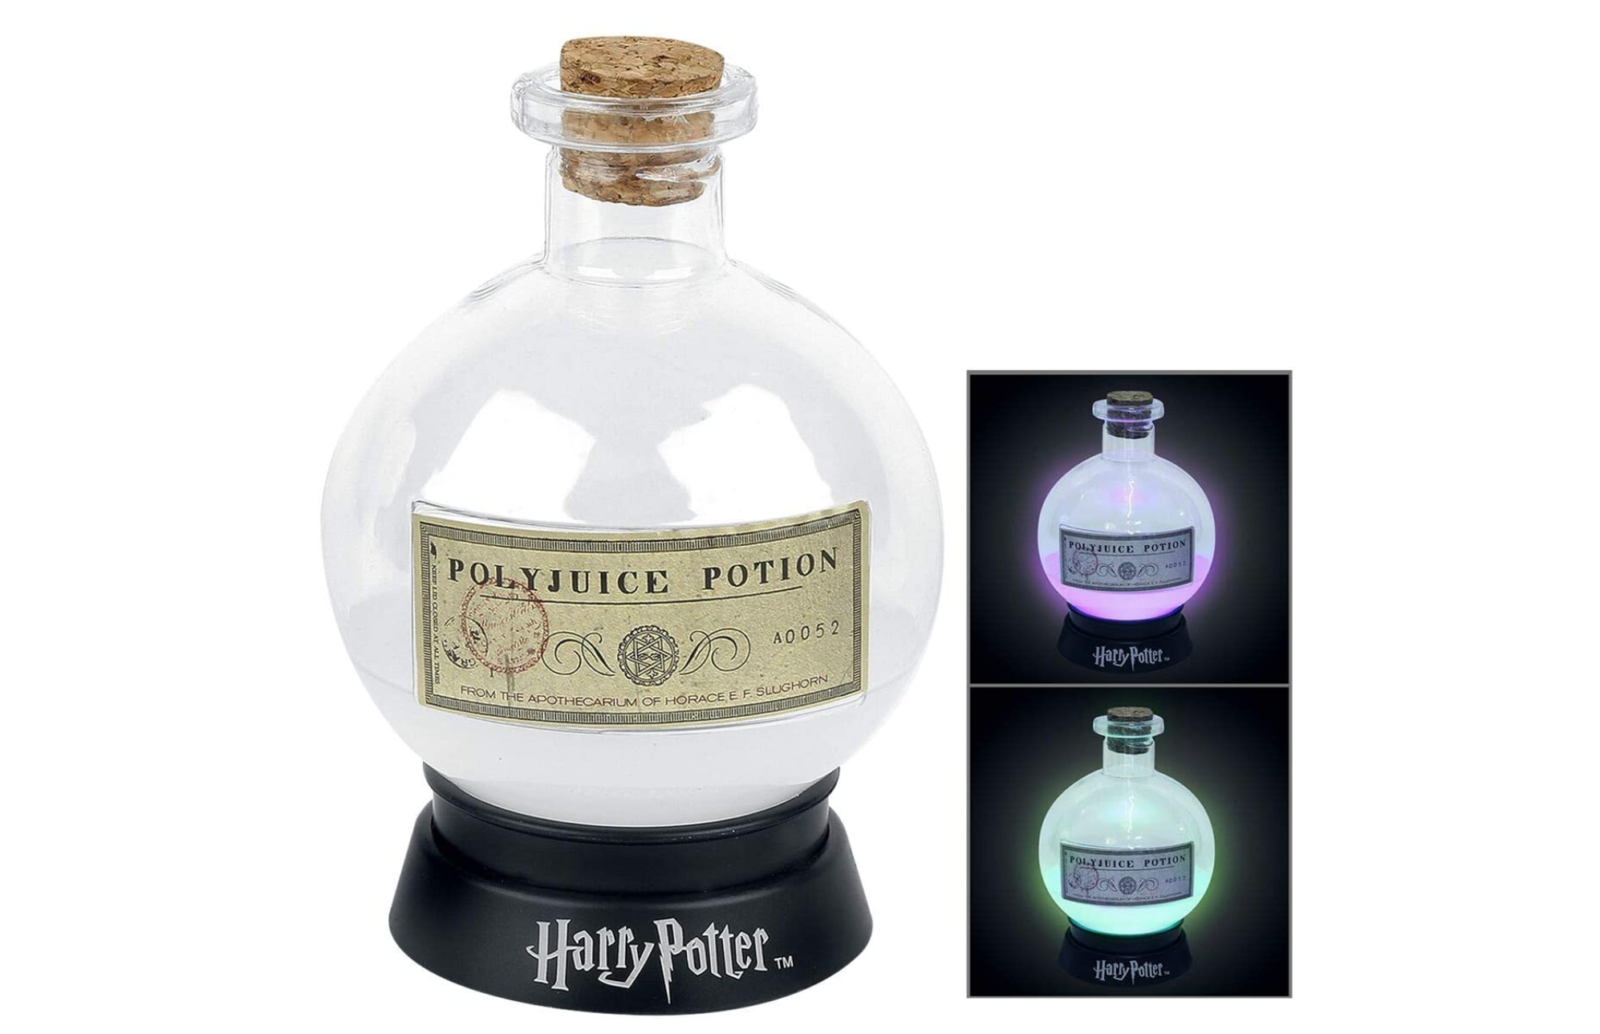 This Polyjuice Potion colour-changing lamp is perfect for Harry Potter fans, The Manc